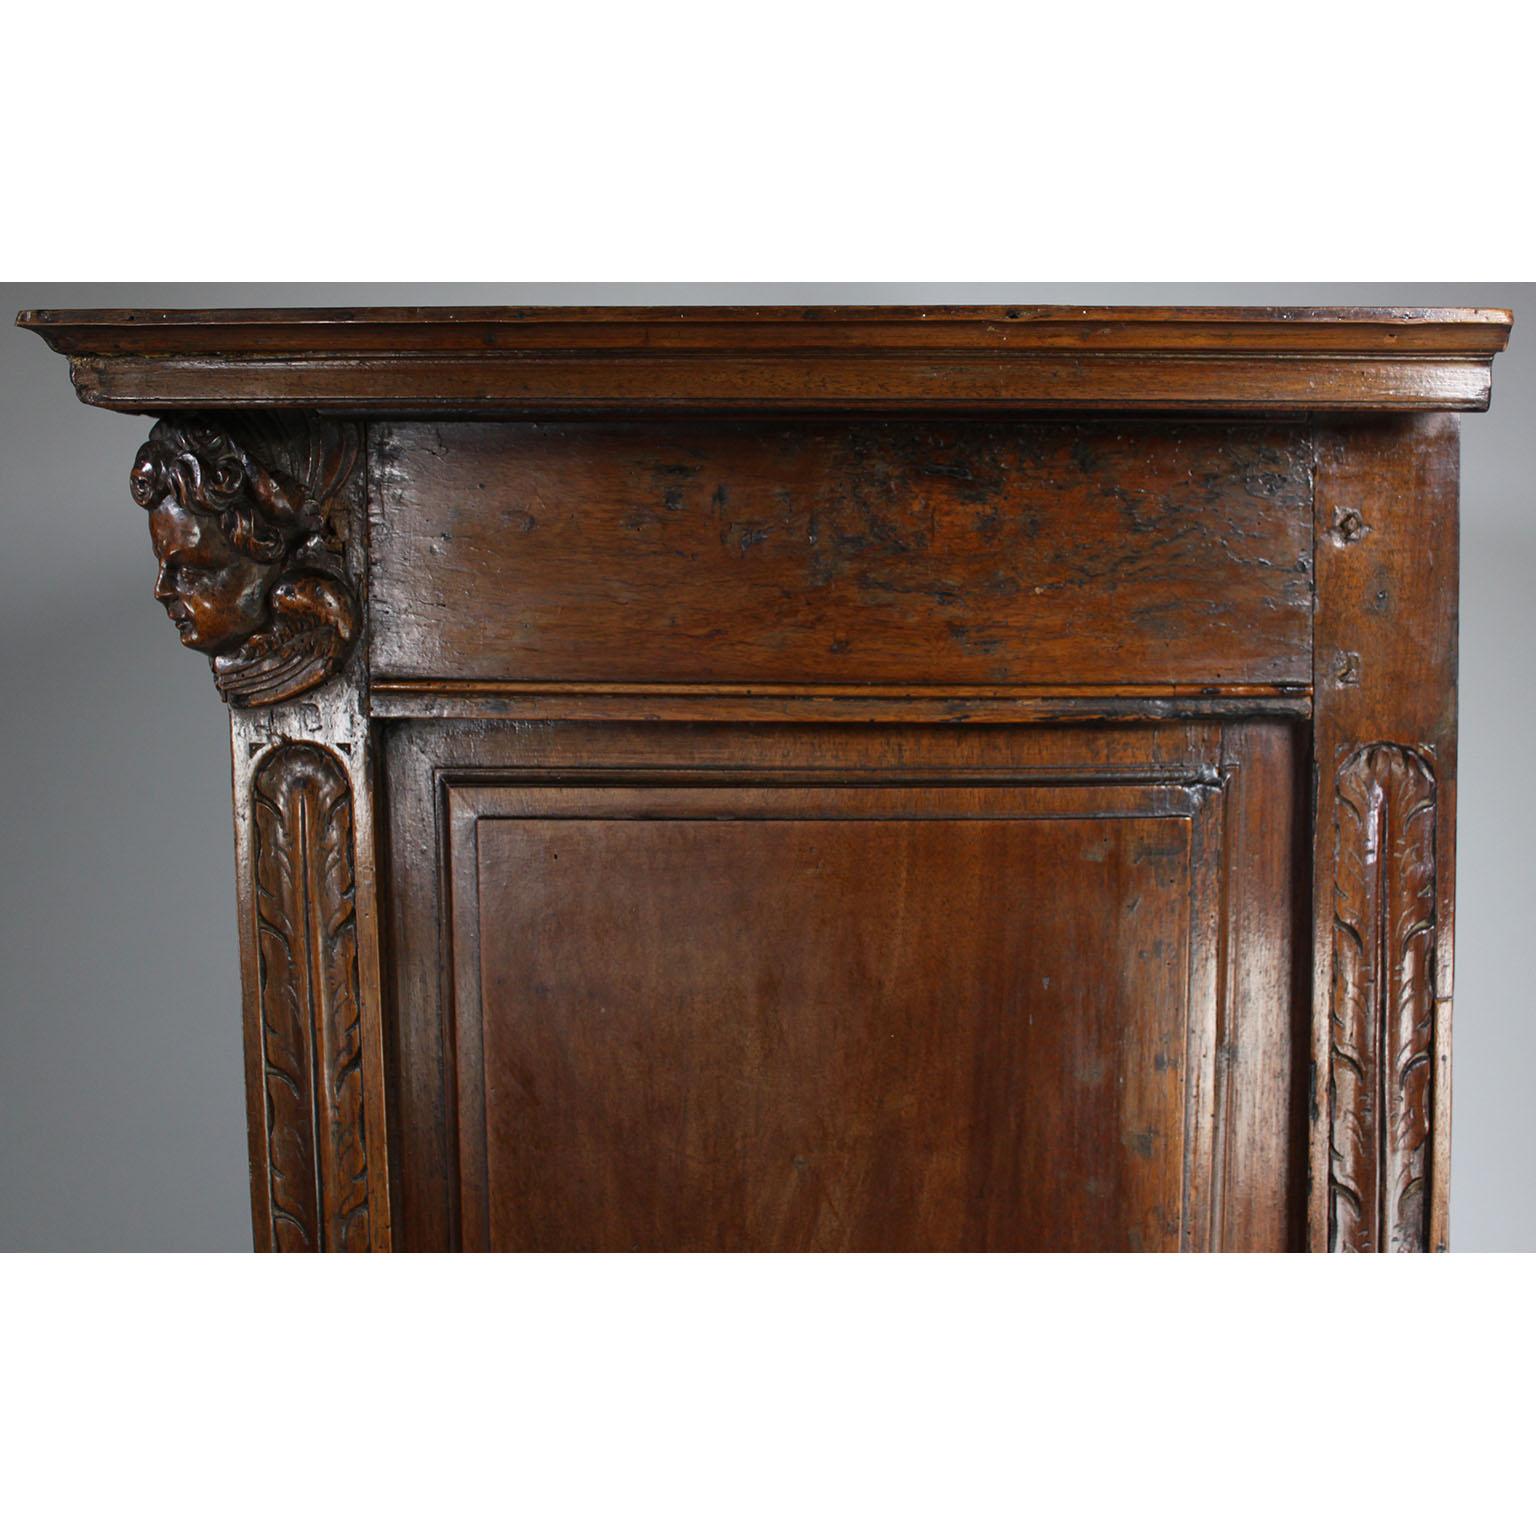 A 17th-18th Century French/Italian Renaissance Walnut Carved Credenza Cabinet For Sale 5